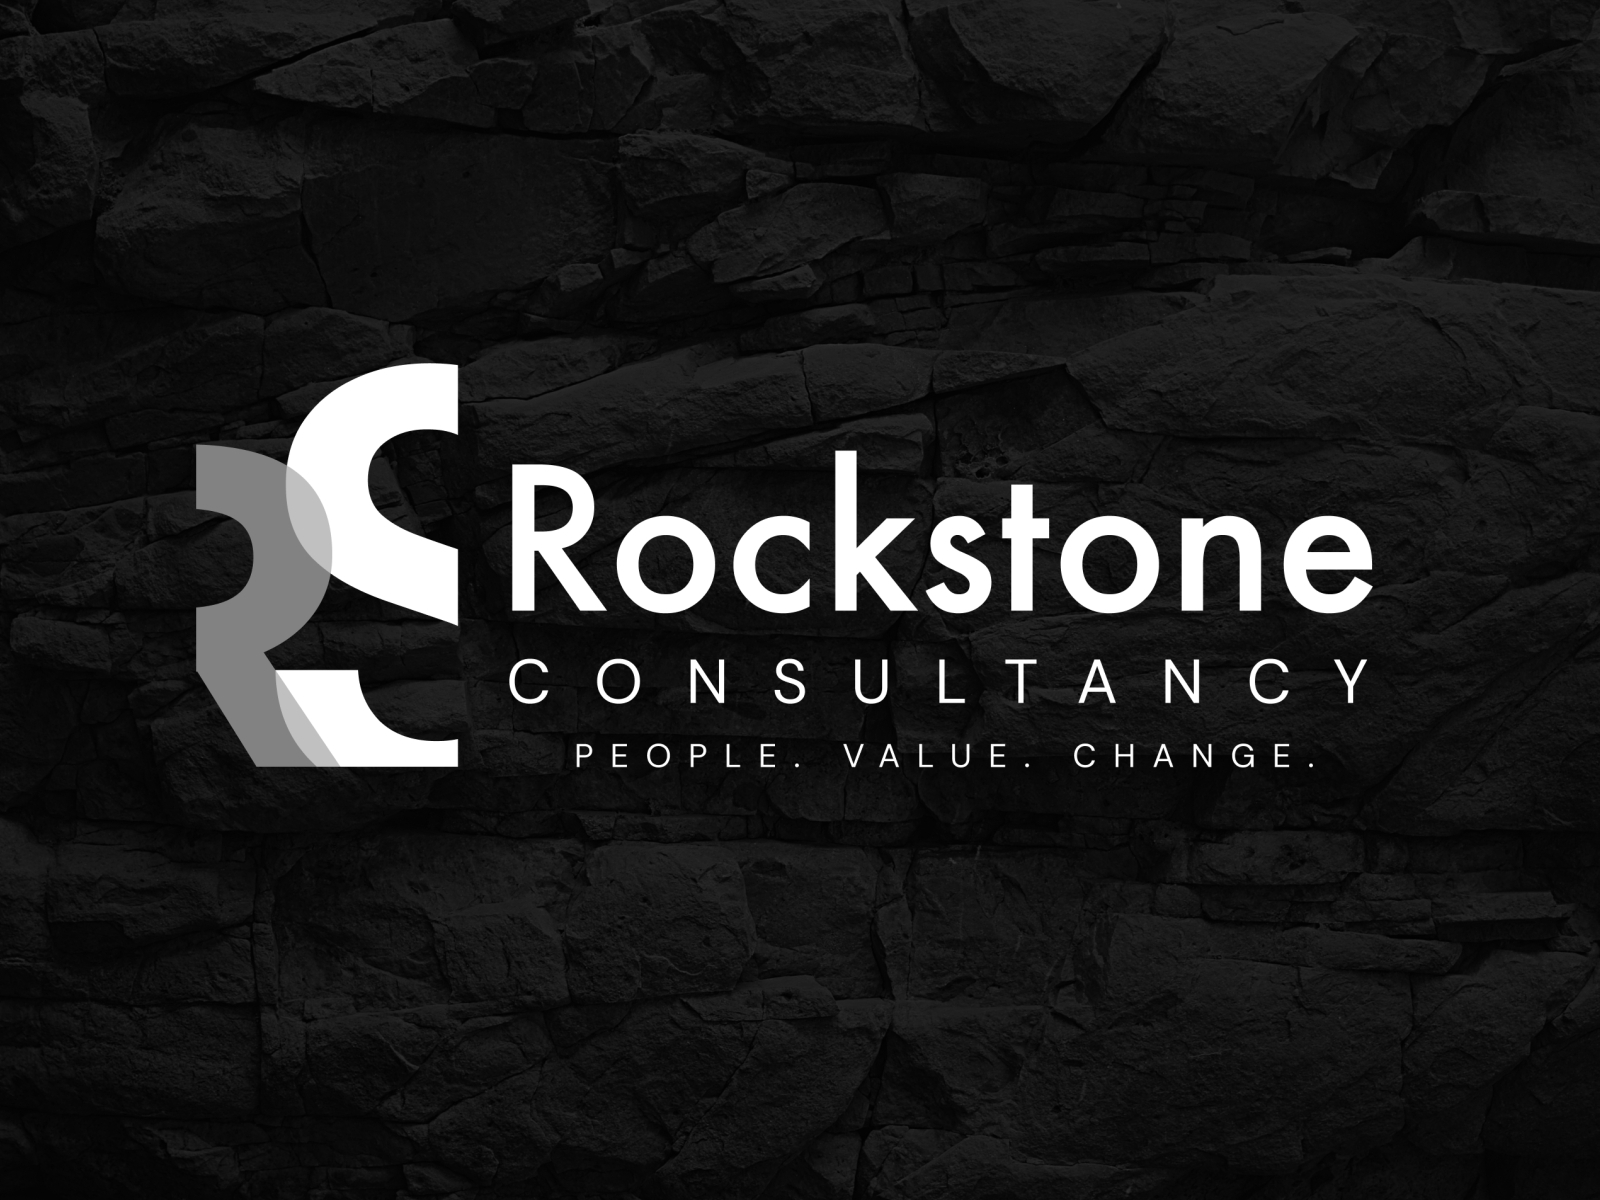 Rockstone Consultancy Logo by Paris Lawrence on Dribbble